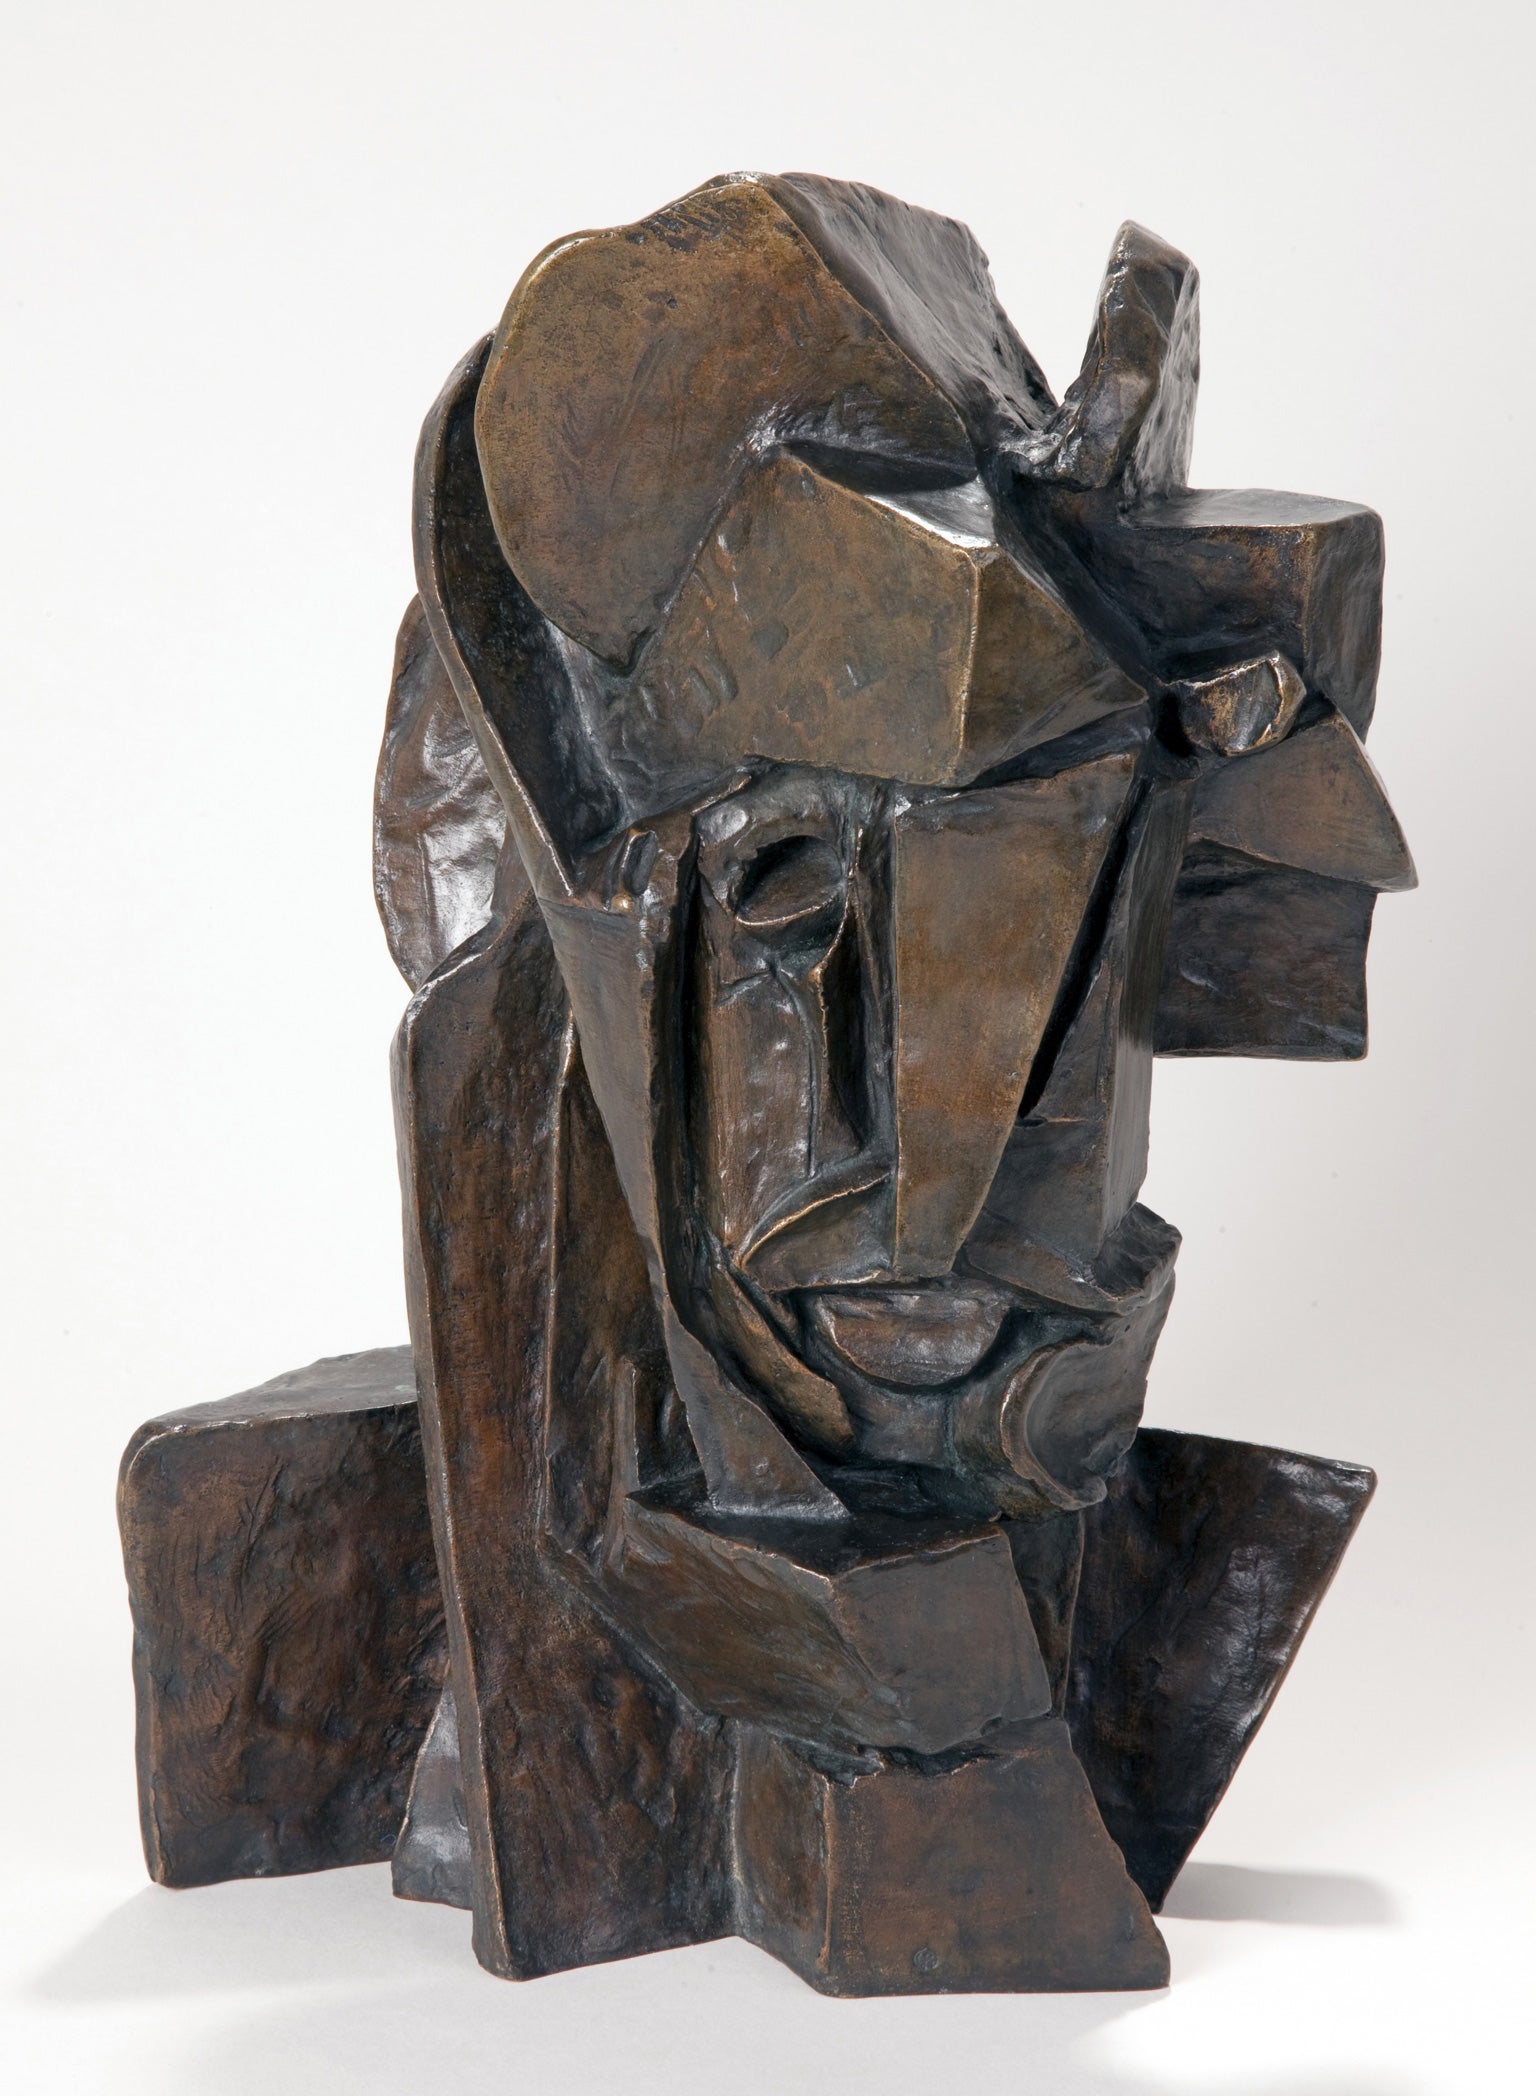 Head Case: Emil Filla’s Cubist Head sculpture challenged traditional notions of the body in space